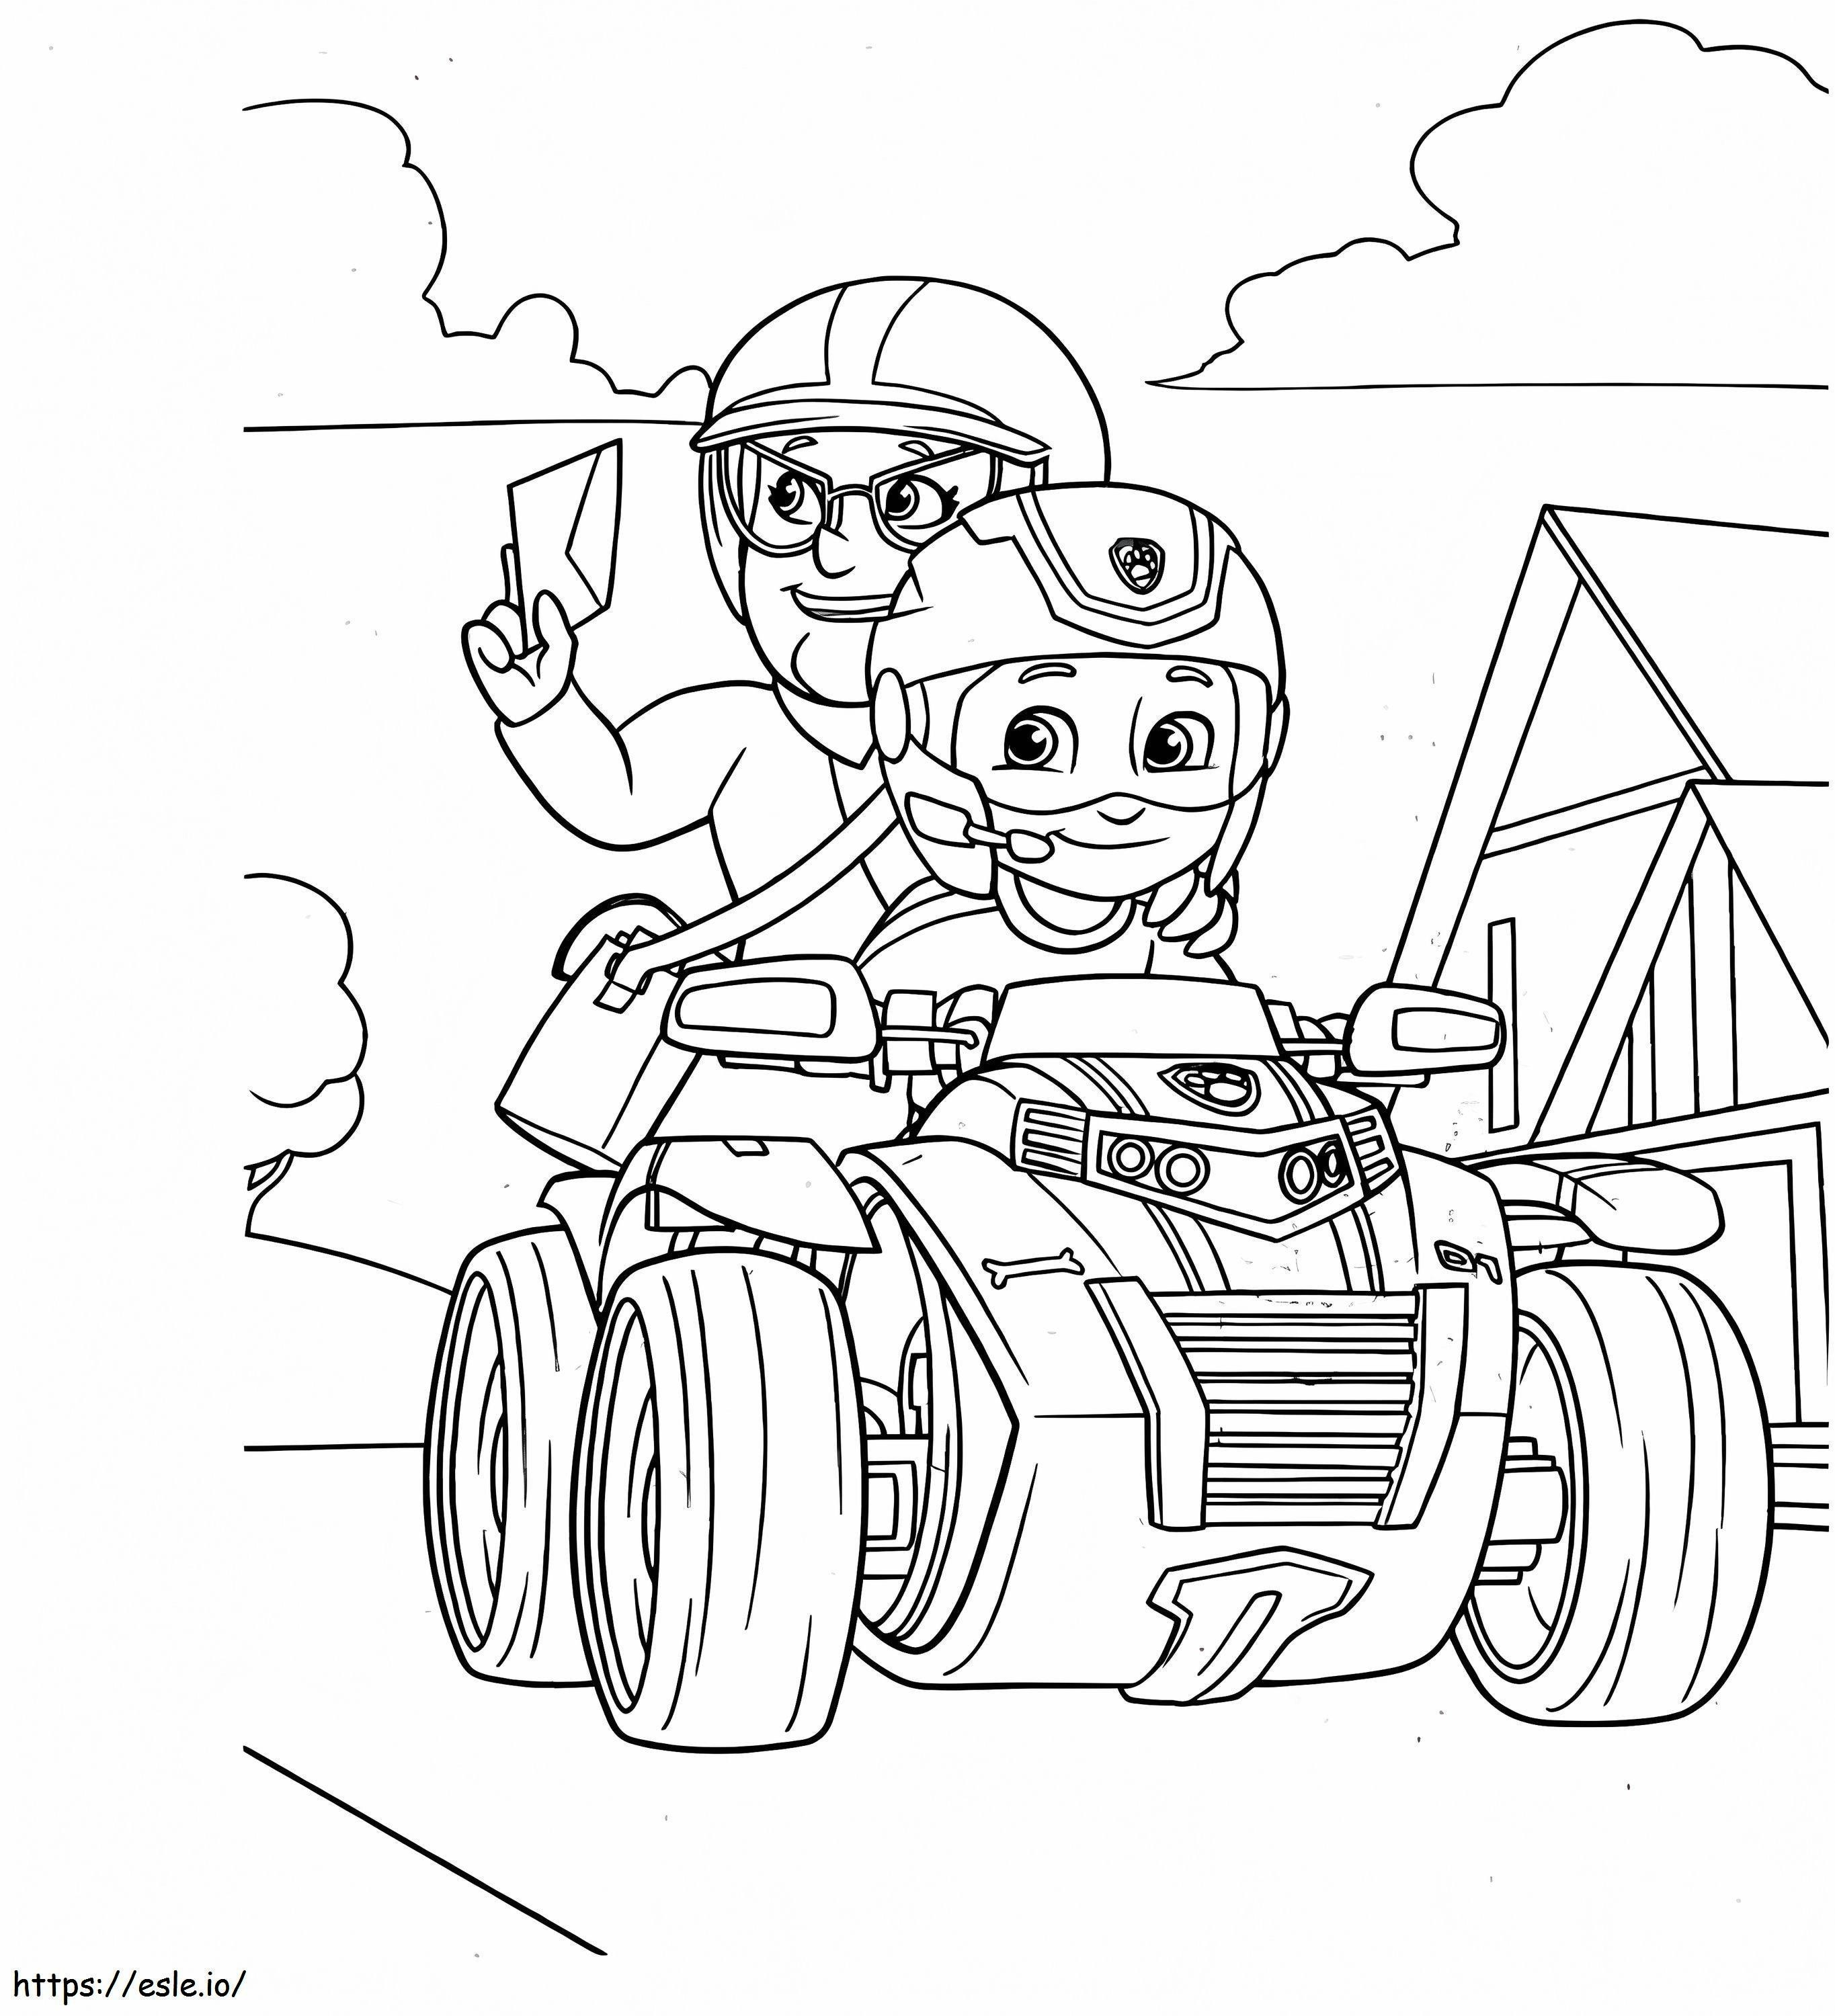 Ryder And Miss Marjorie coloring page